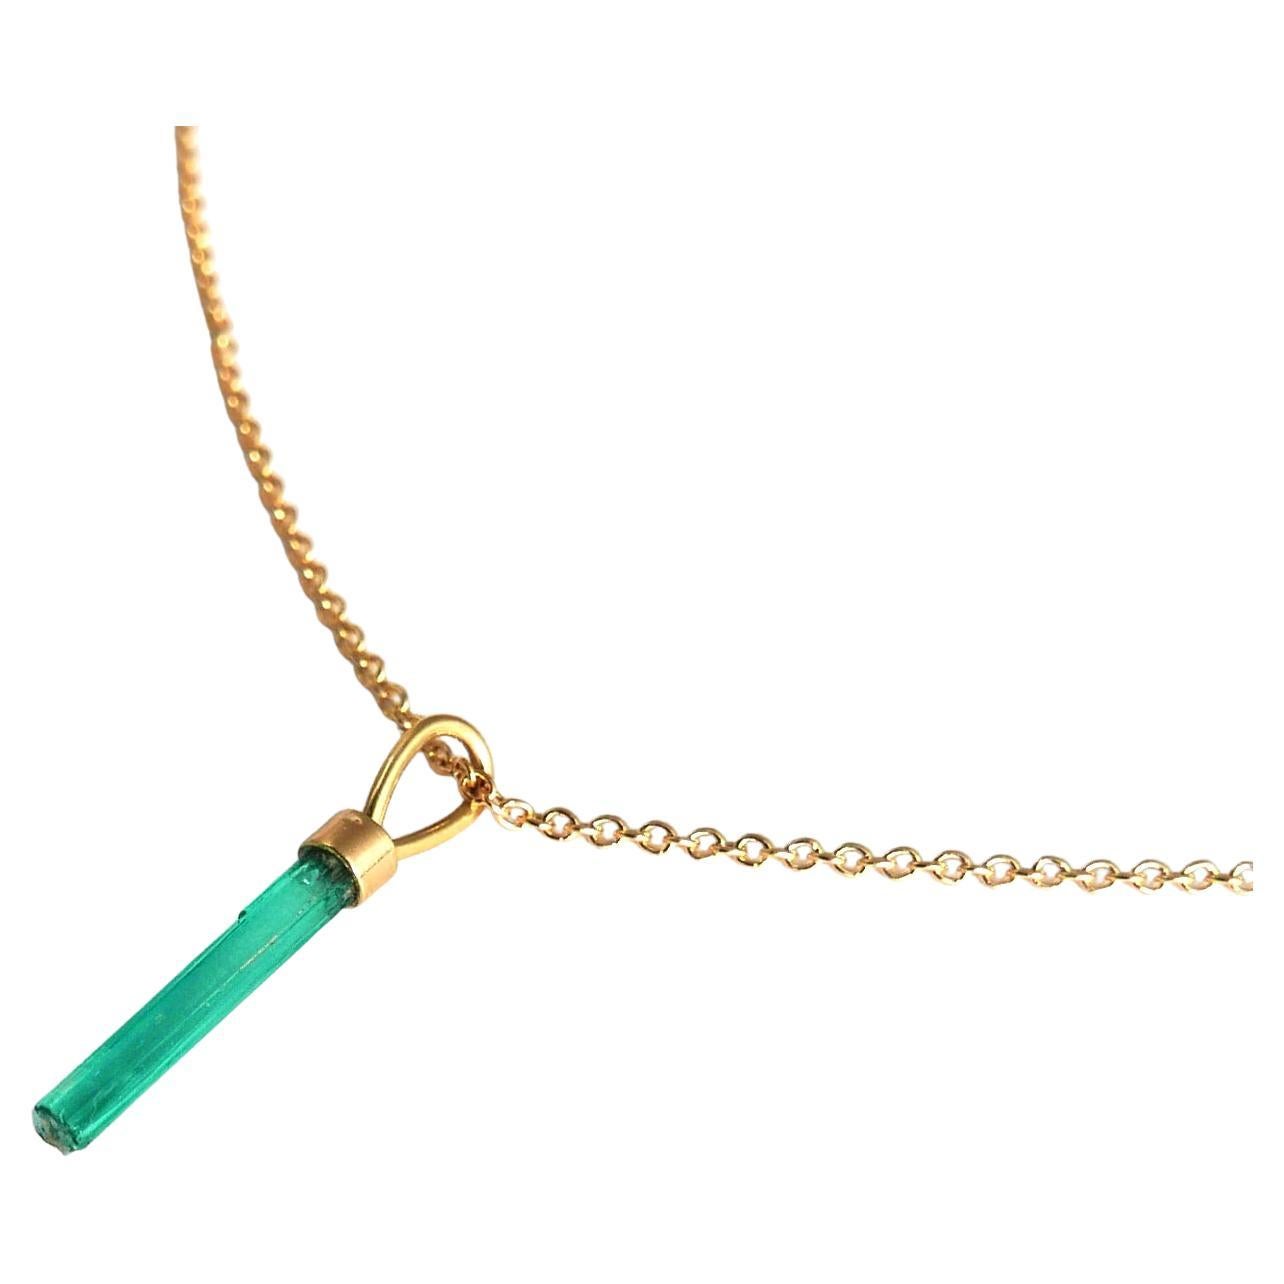 Emerald Needle Pendant Necklace in 18 Karat Gold by Allison Bryan For Sale